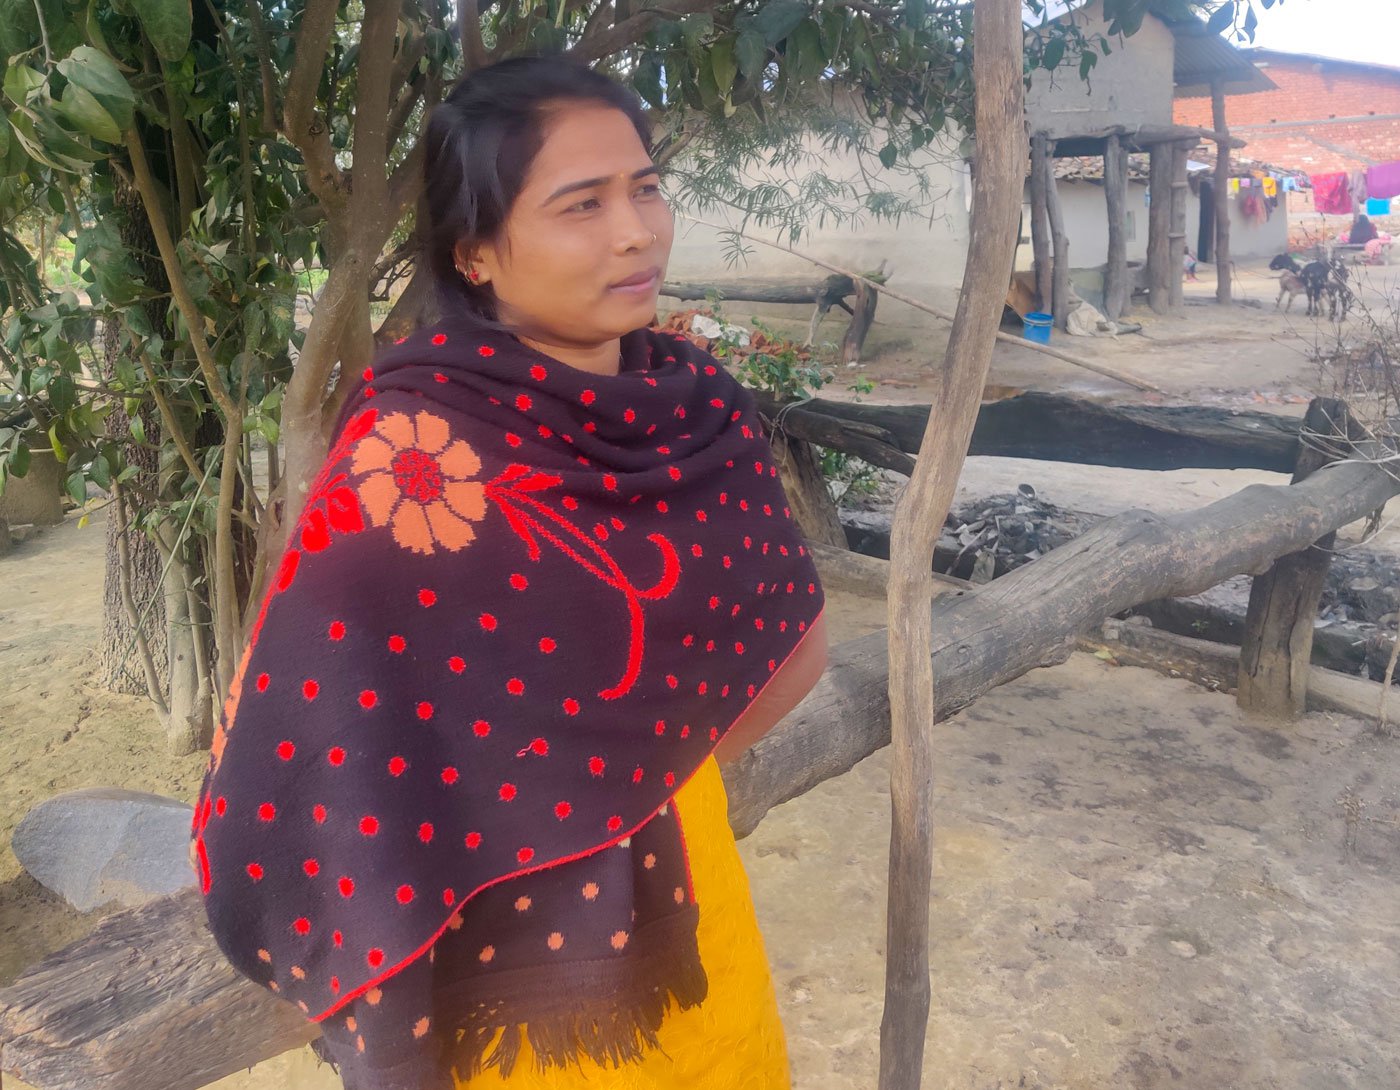 Mansarovar outside her house in Kajariya. In January, she walked through the forest with her infant son to reach Geta Eye Hospital across the border. "No hospital in our district is as good as Geta for eye care," she says